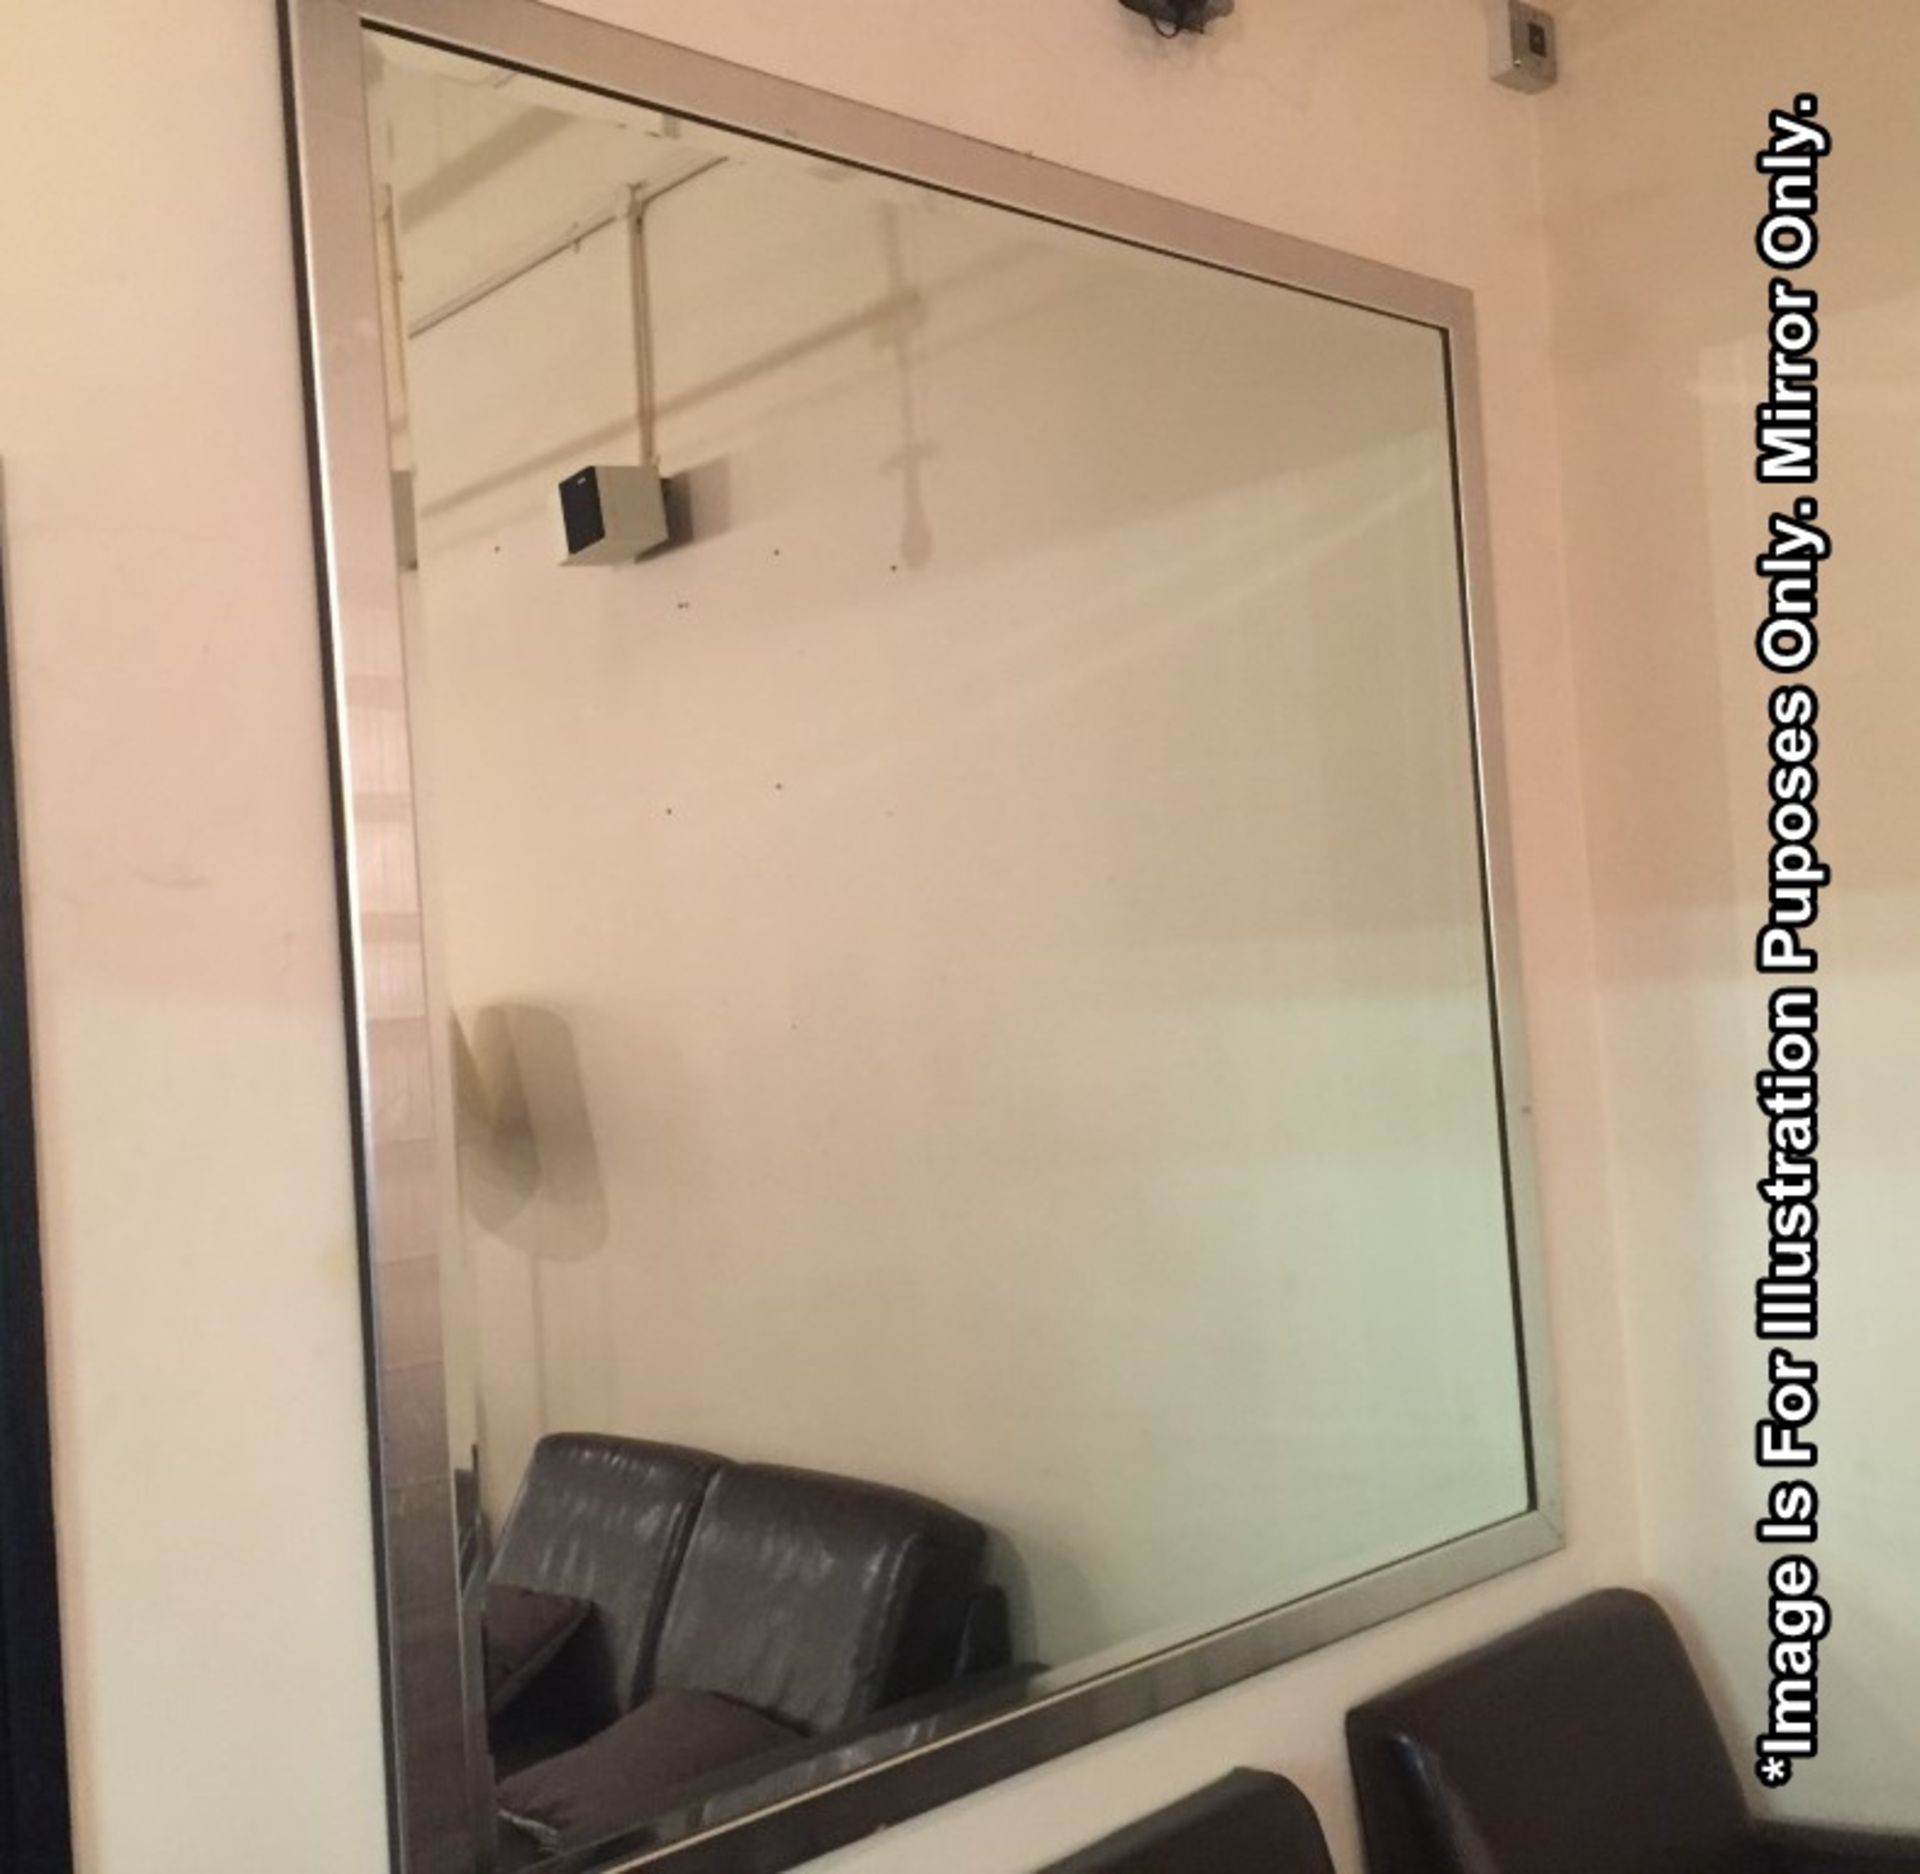 1 x Large Square Wall Mirror With Beveled Edge - Dimensions: 148cm x 148cm - Ref: APB006 - Good - Image 3 of 5